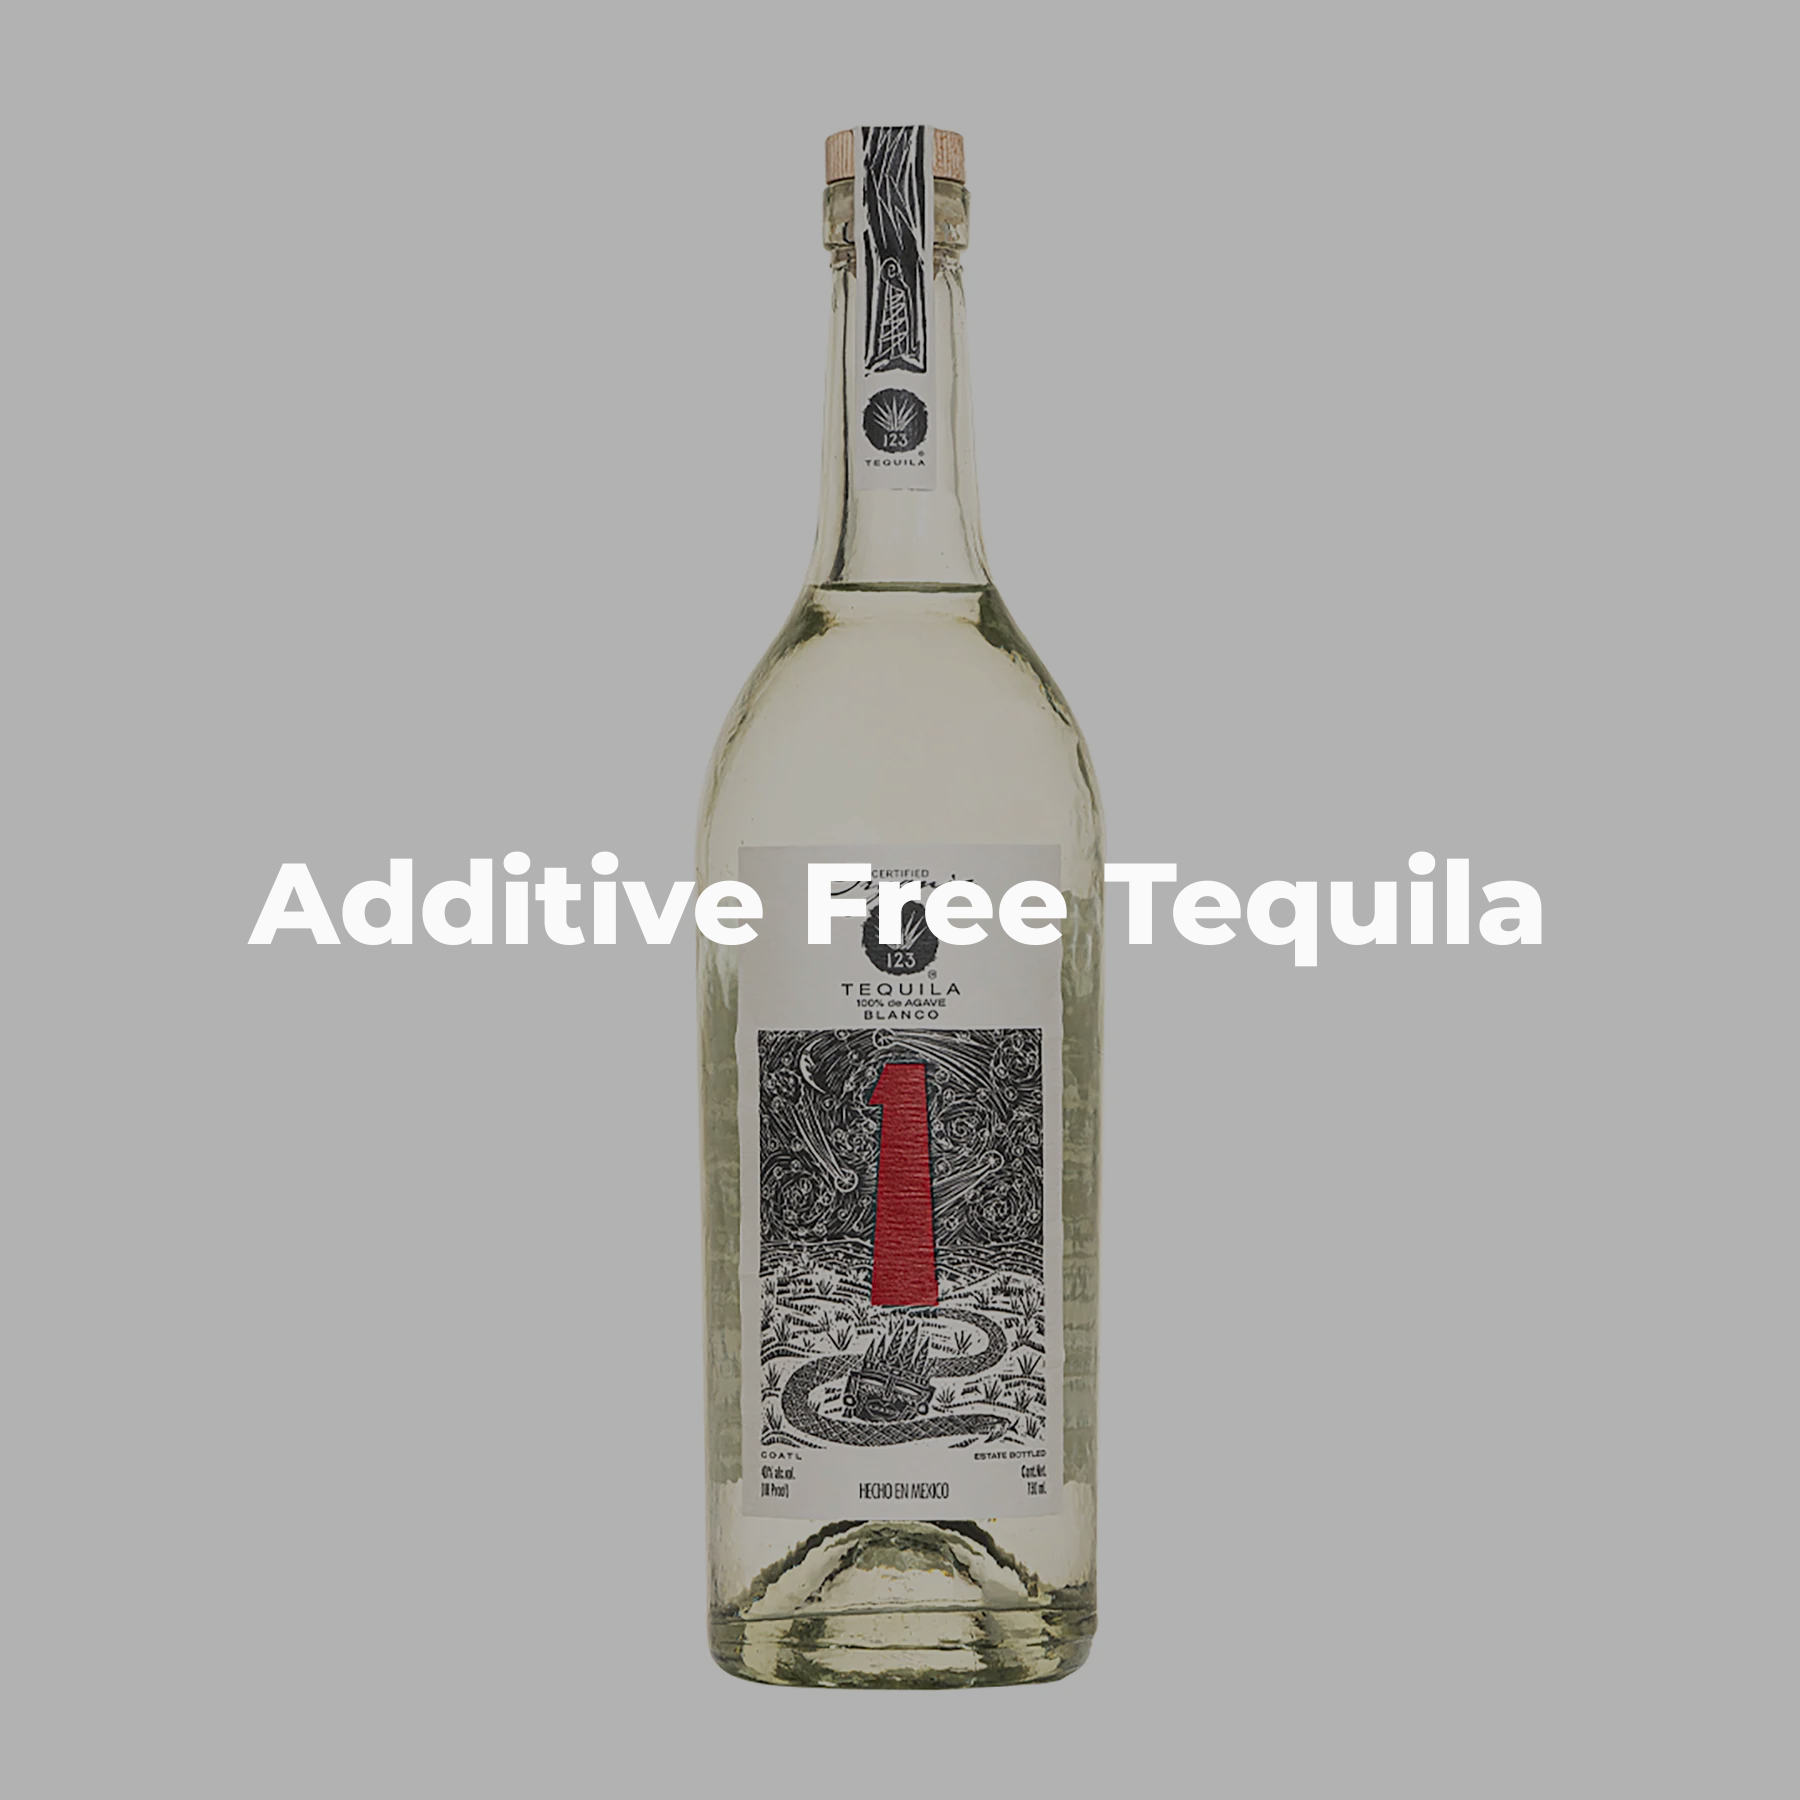 Additive Free Tequila